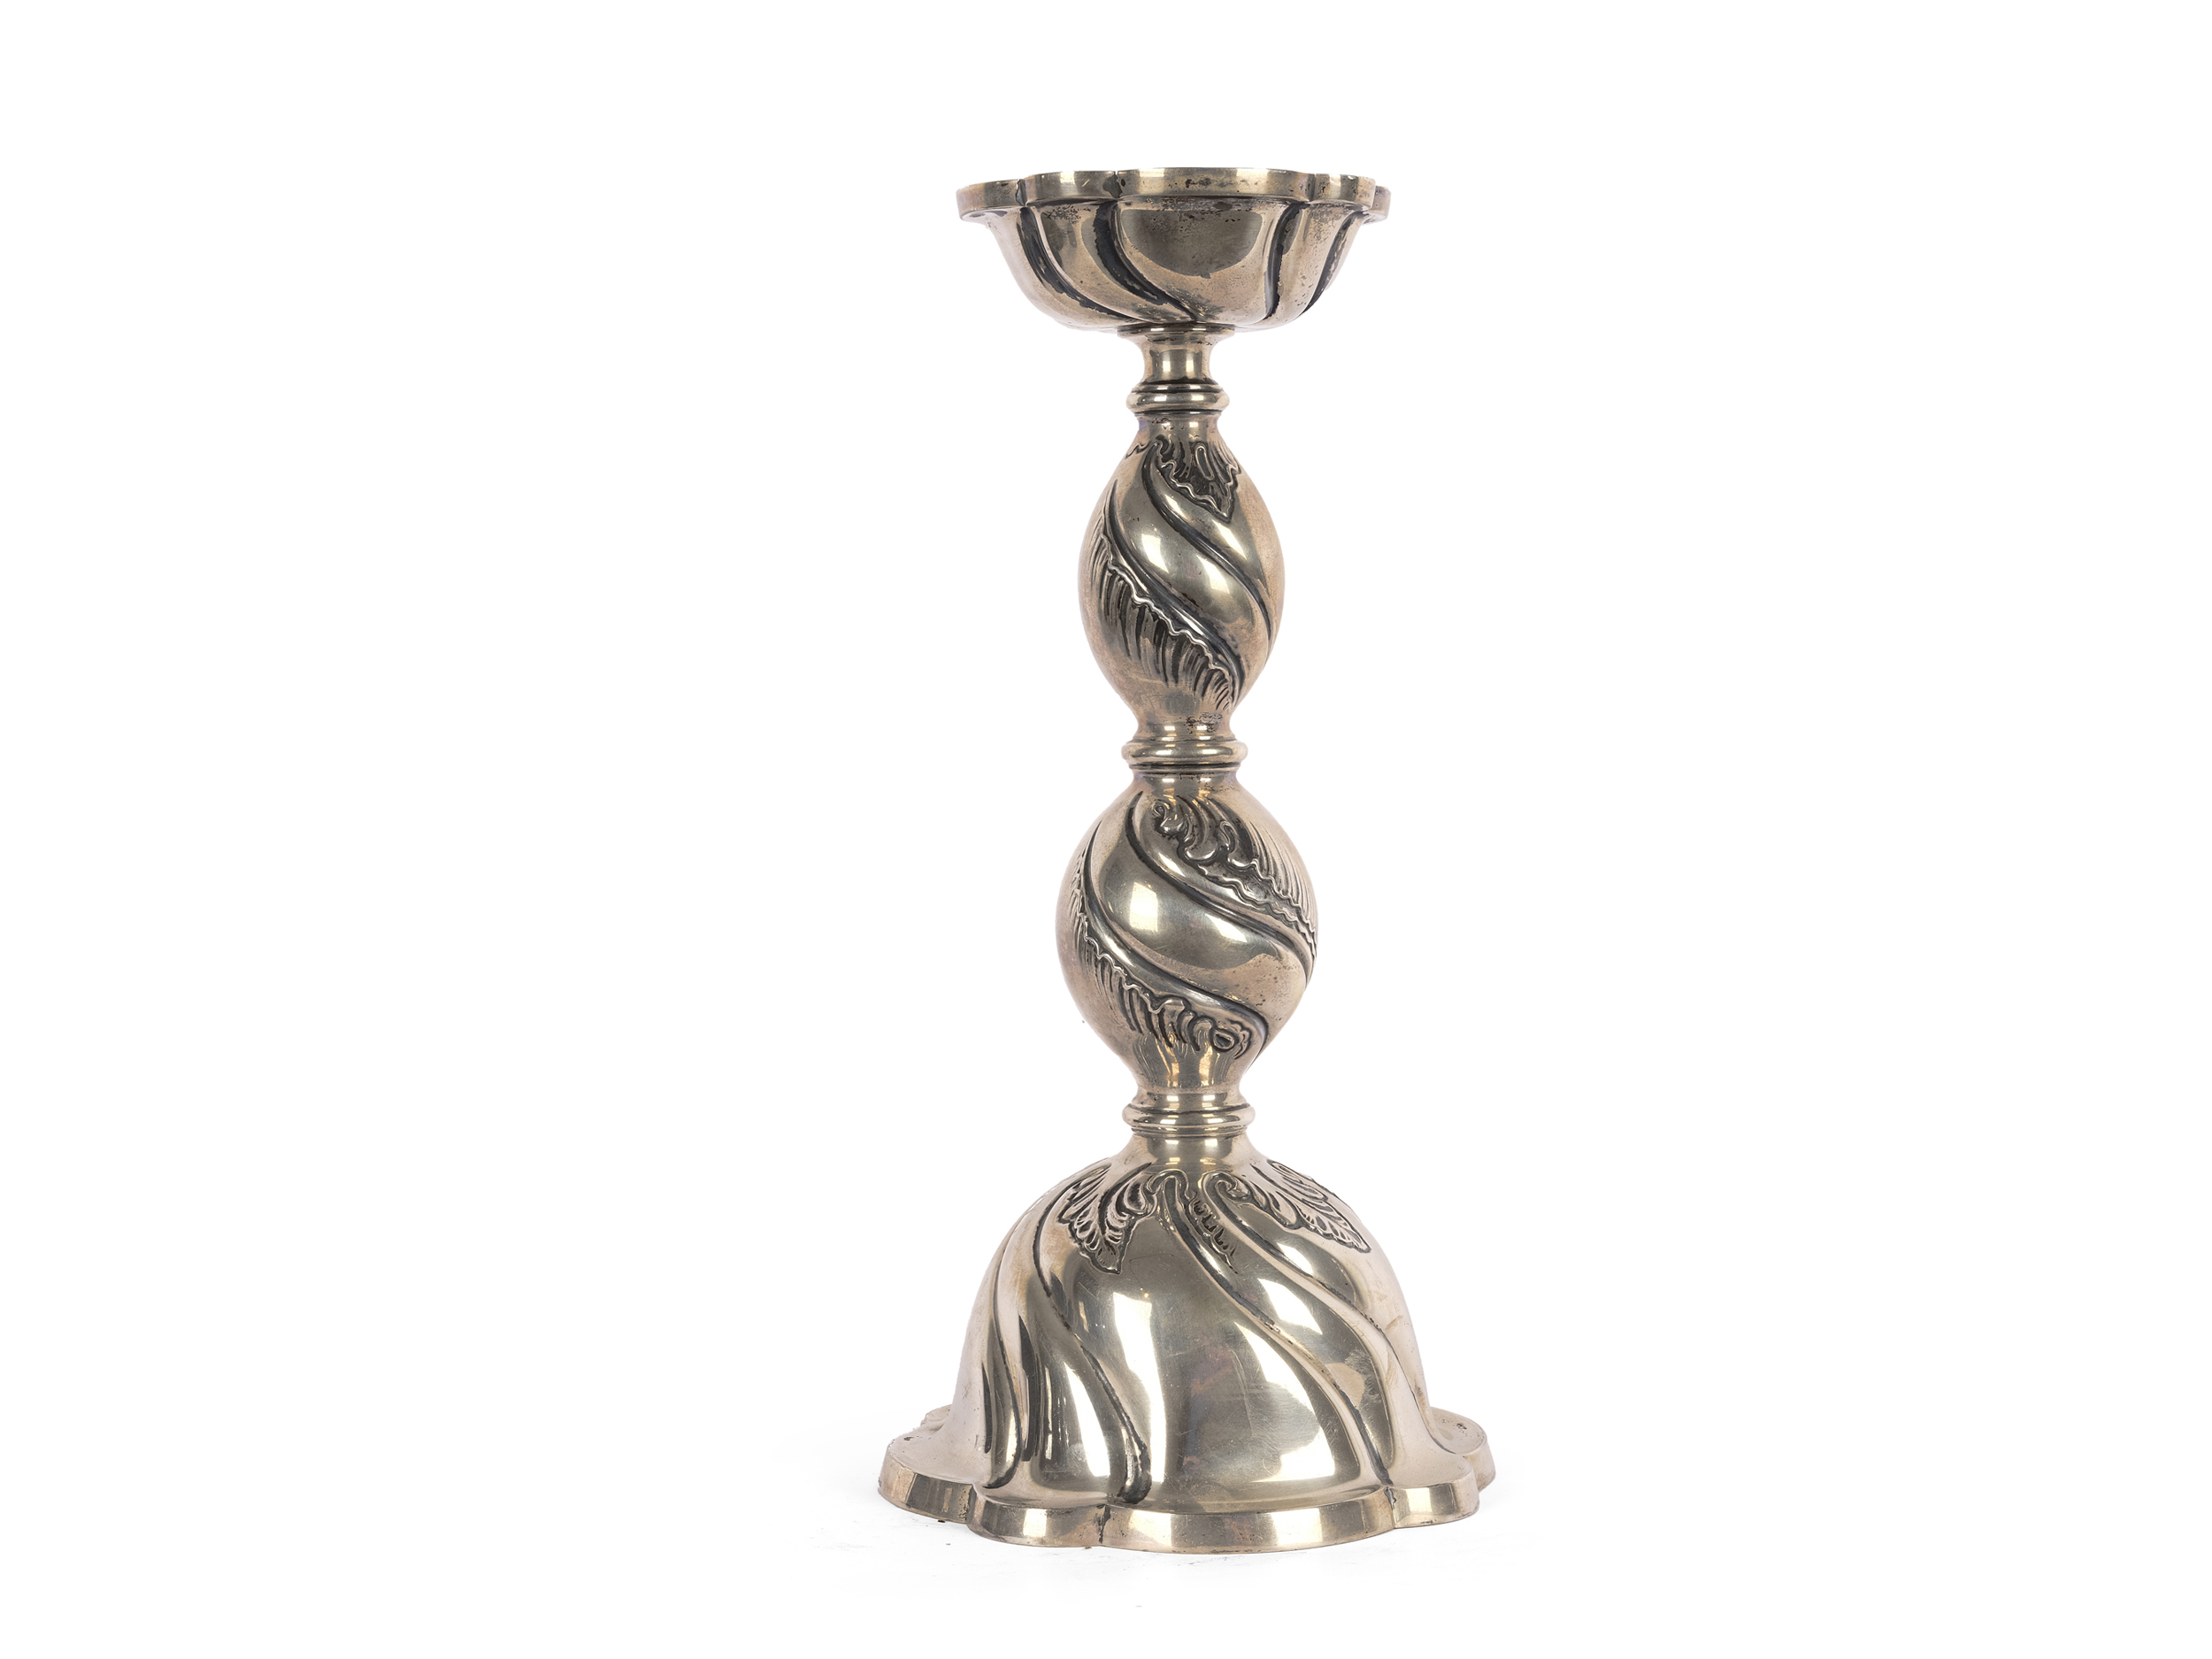 Candlestick, mid 19th century - Image 2 of 5